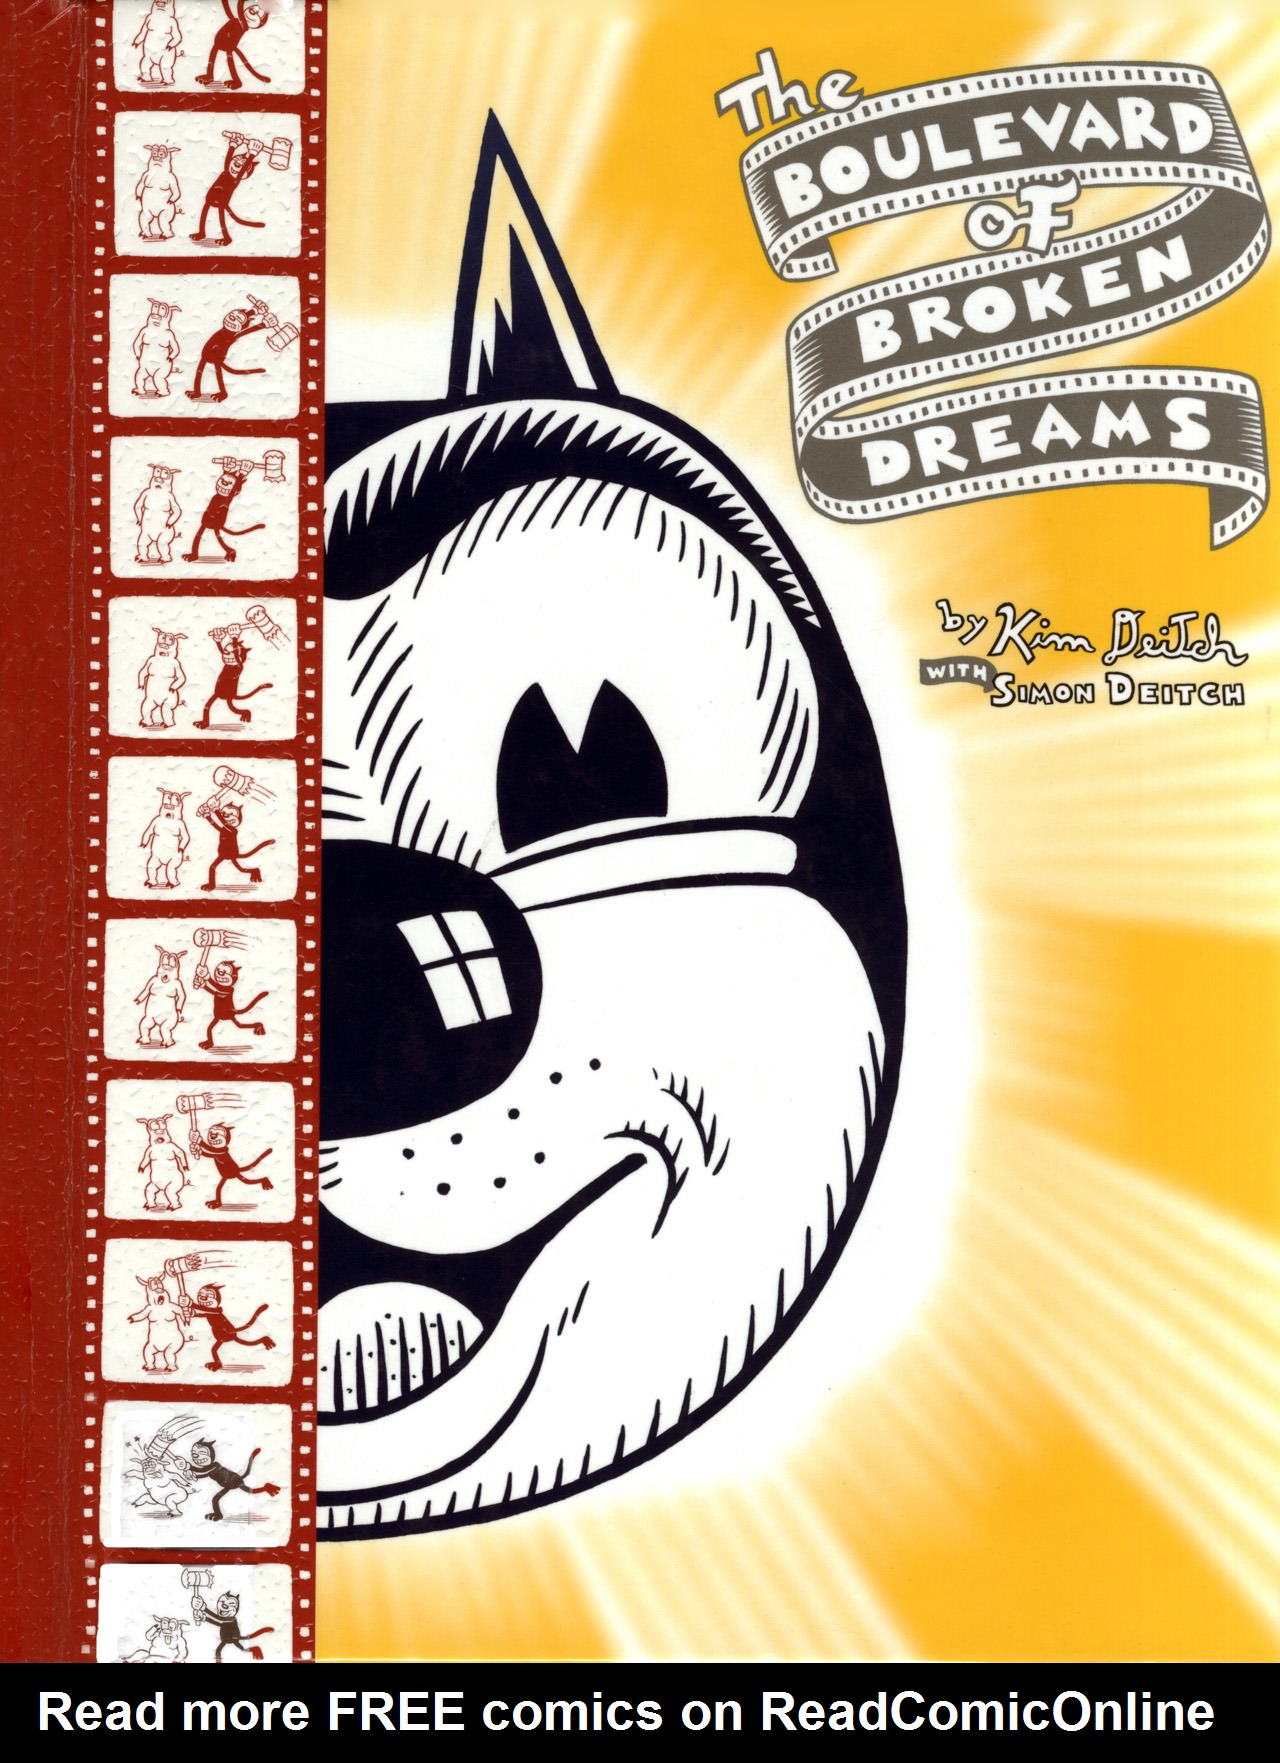 Read online The Boulevard of Broken Dreams comic -  Issue # TPB (Part 1) - 1